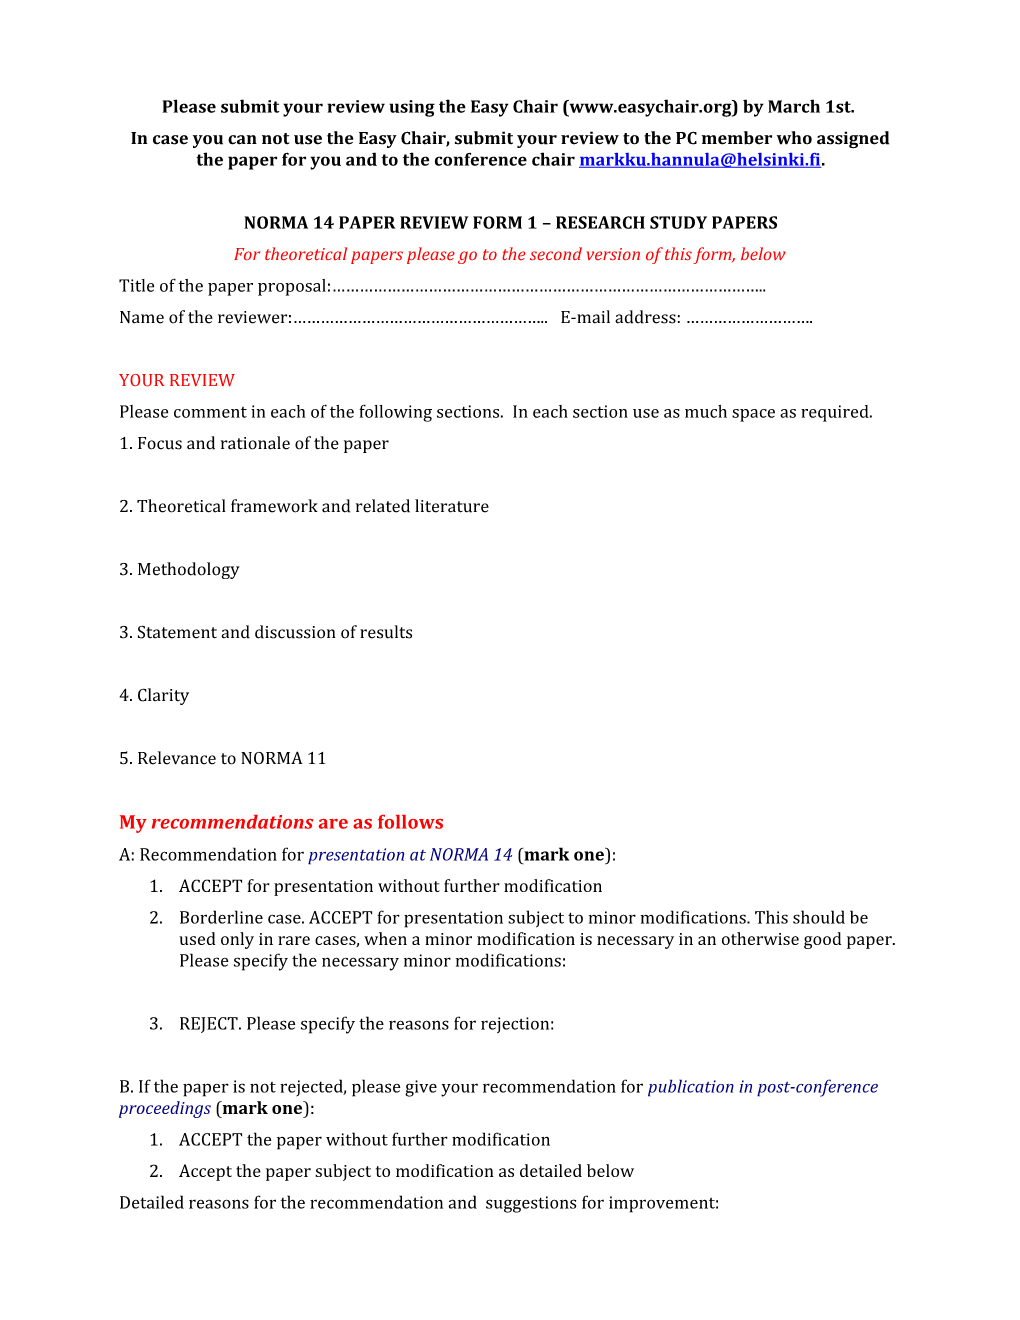 Norma 14 Paper Review Form 1 Research Study Papers